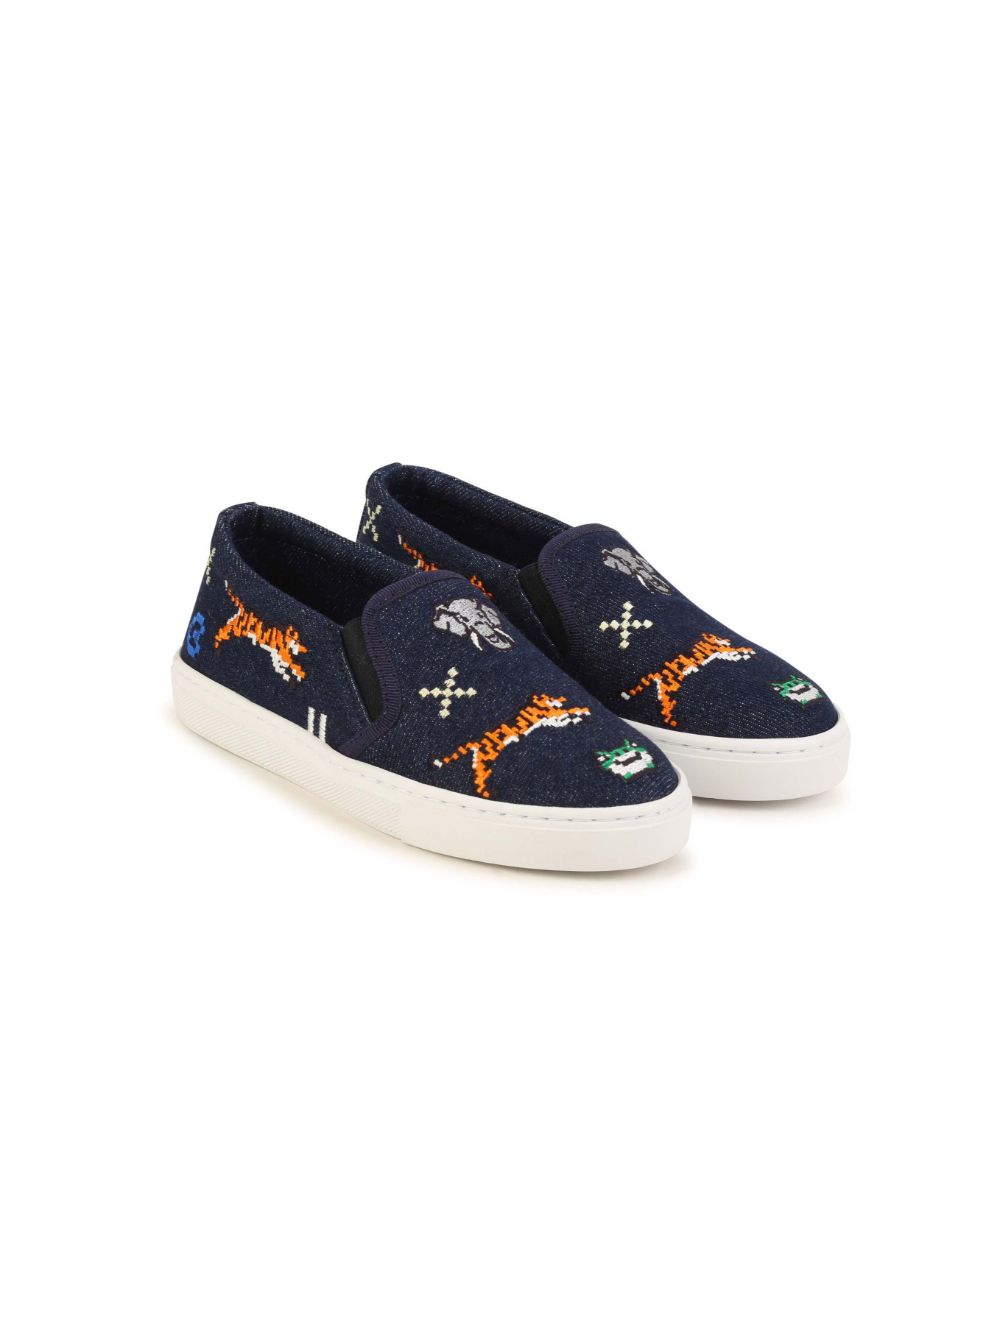 Kenzo Kids embroidered slip-on sneakers - Blue